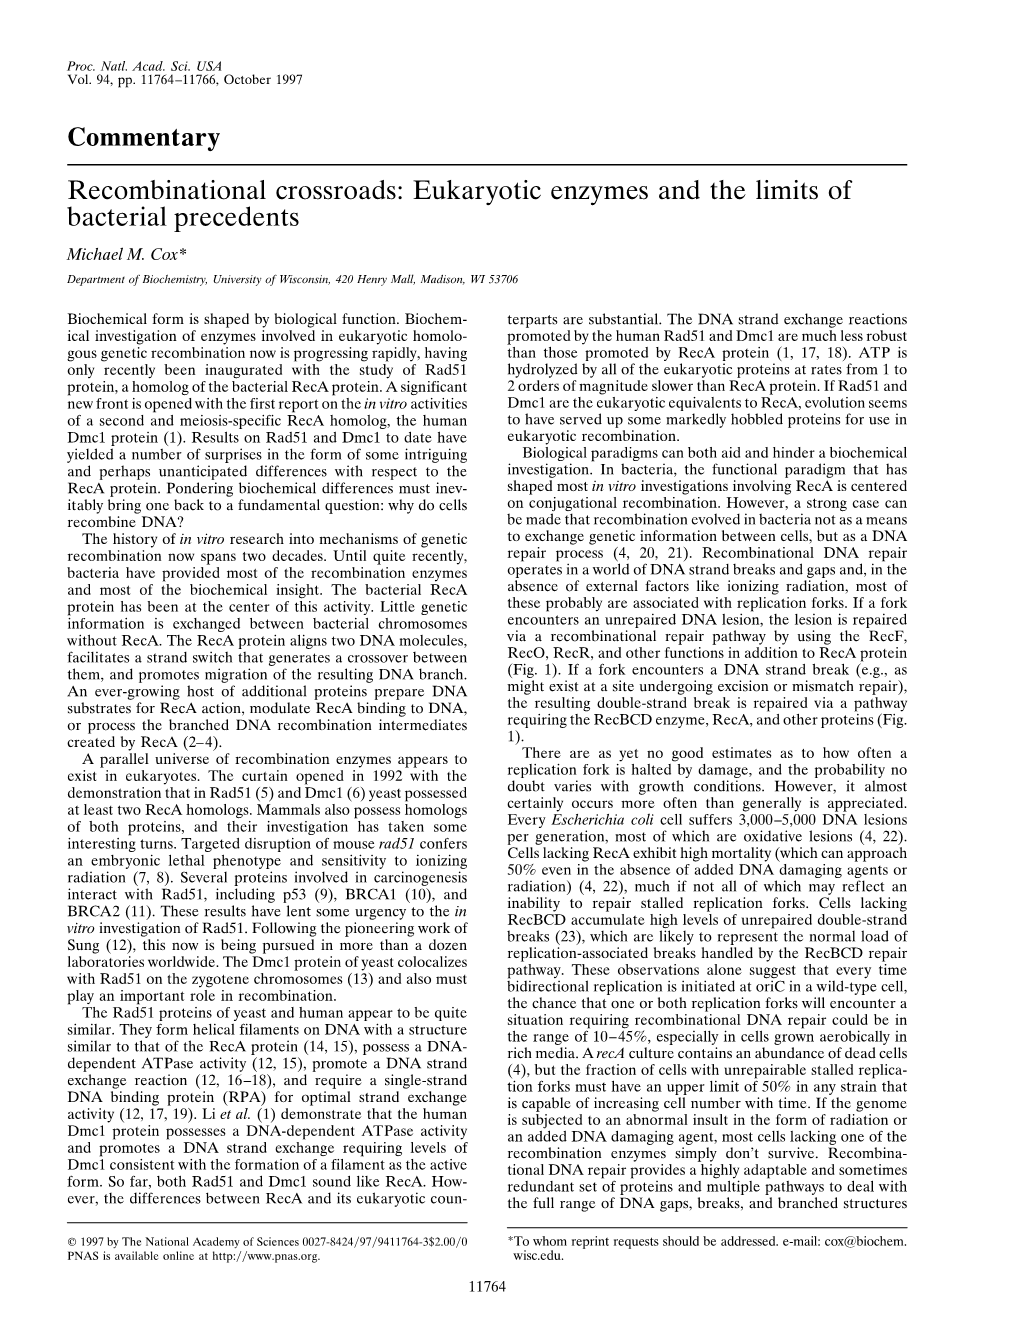 Commentary Recombinational Crossroads: Eukaryotic Enzymes and the Limits of Bacterial Precedents